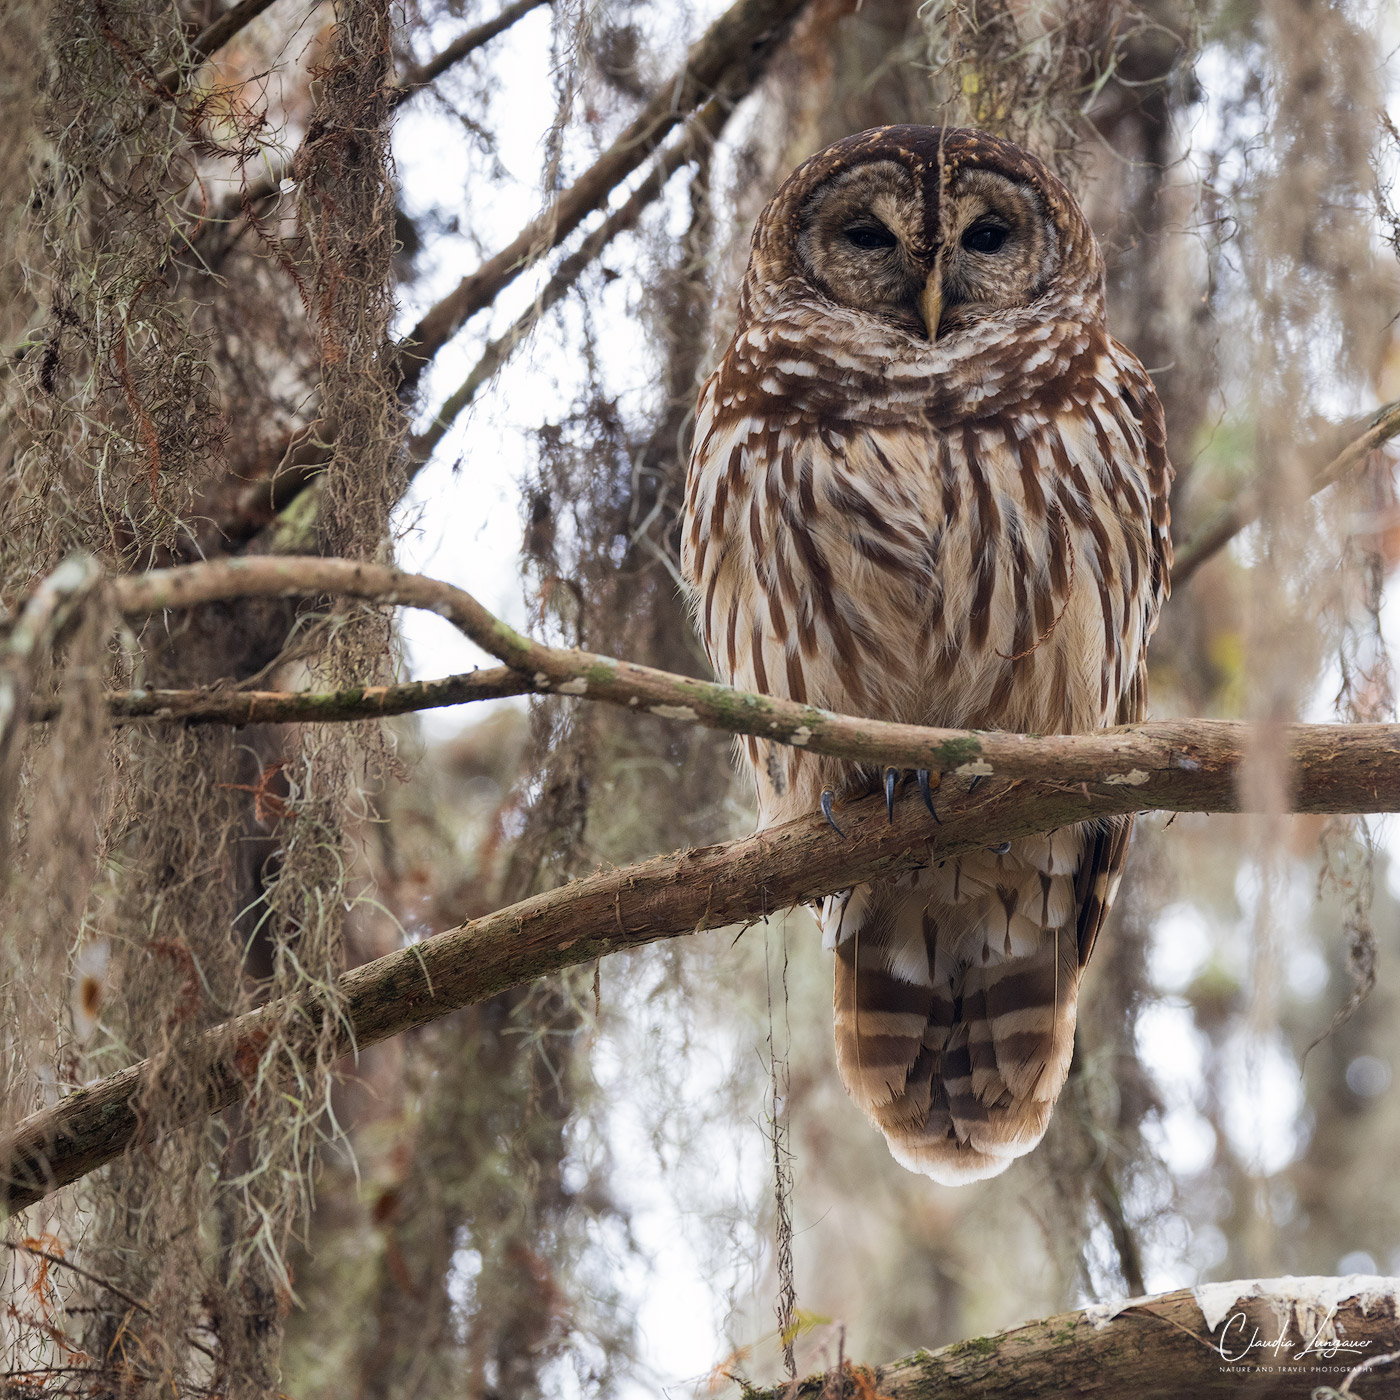 An owl in the swampland at Martin Lake in Louisiana.